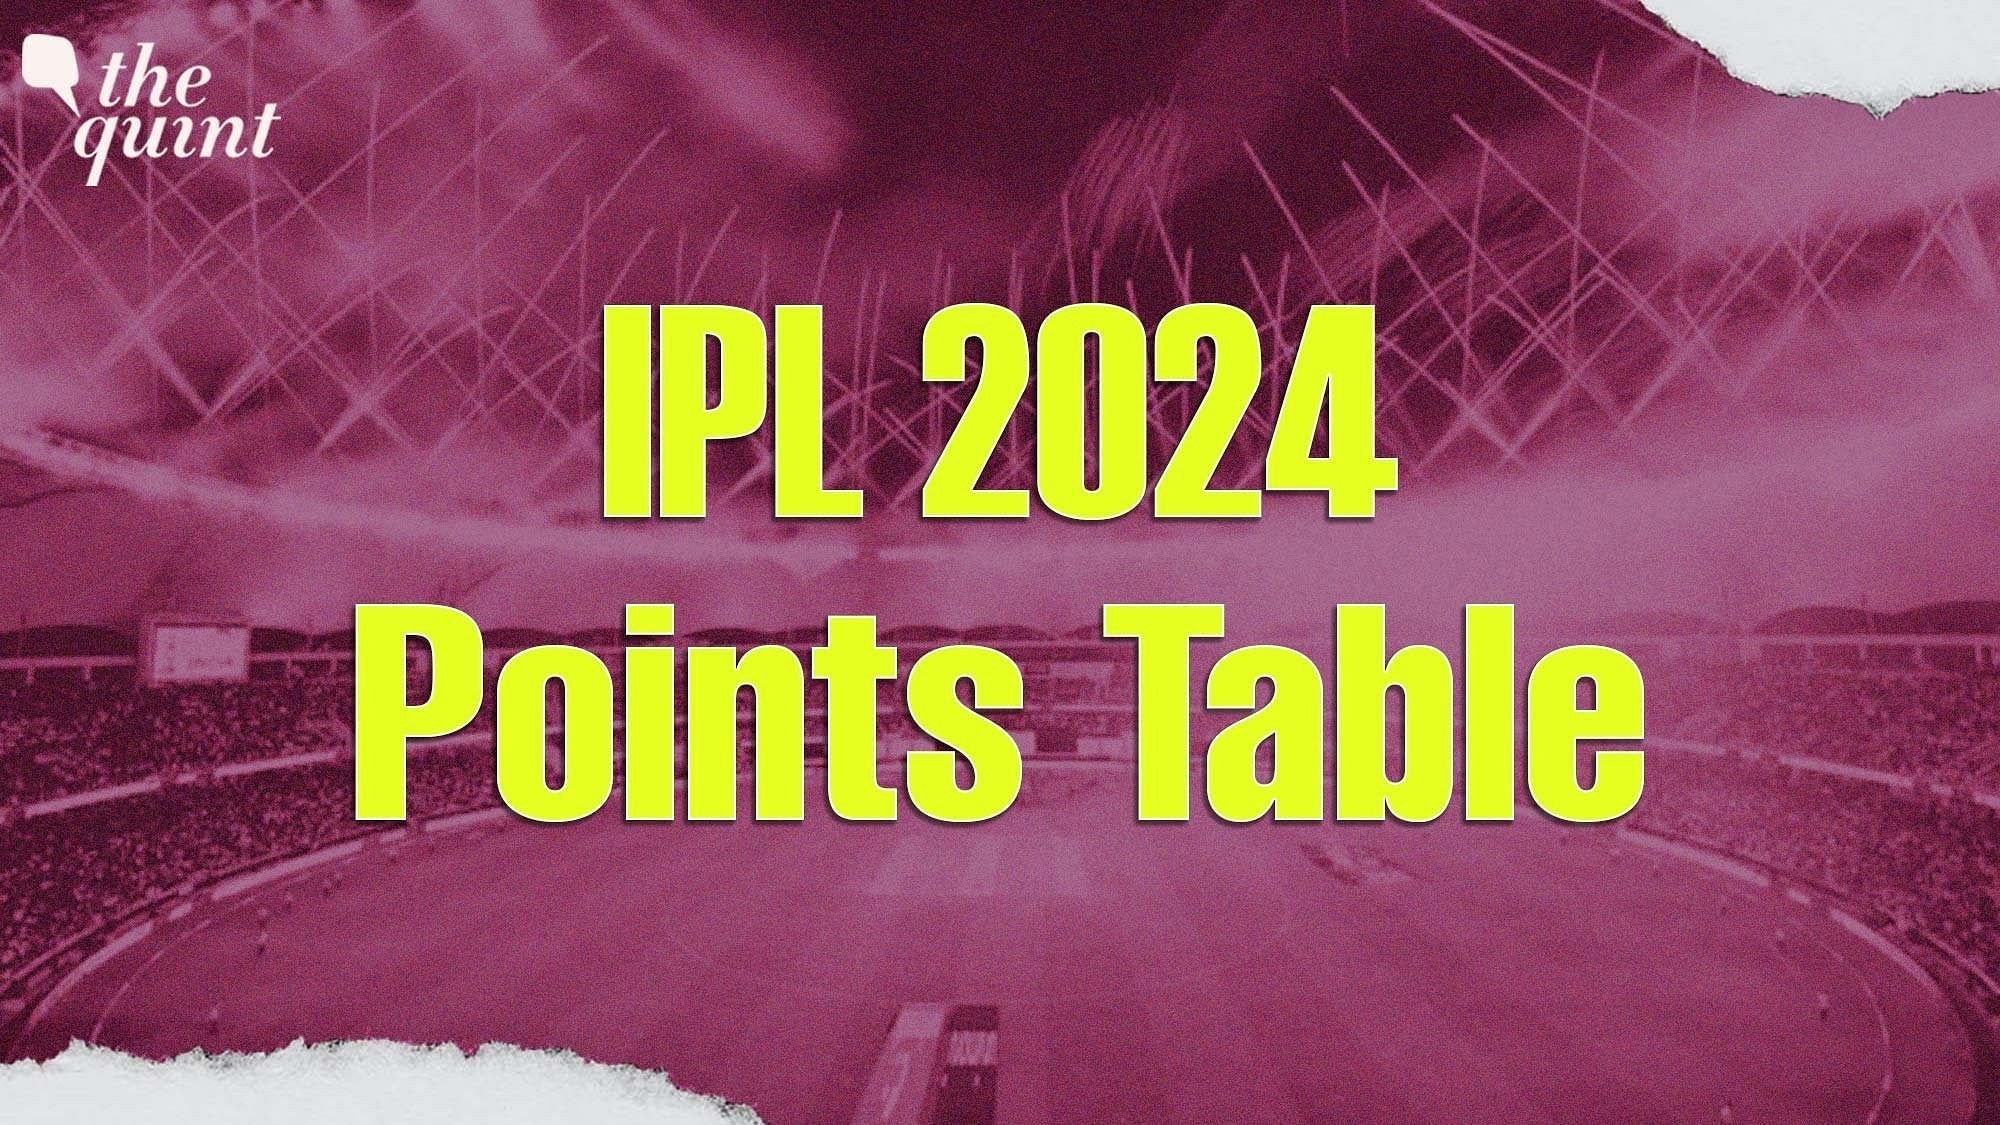 <div class="paragraphs"><p>Know the top teams in the IPL 2024 points table after the latest match on Wednesday.</p></div>